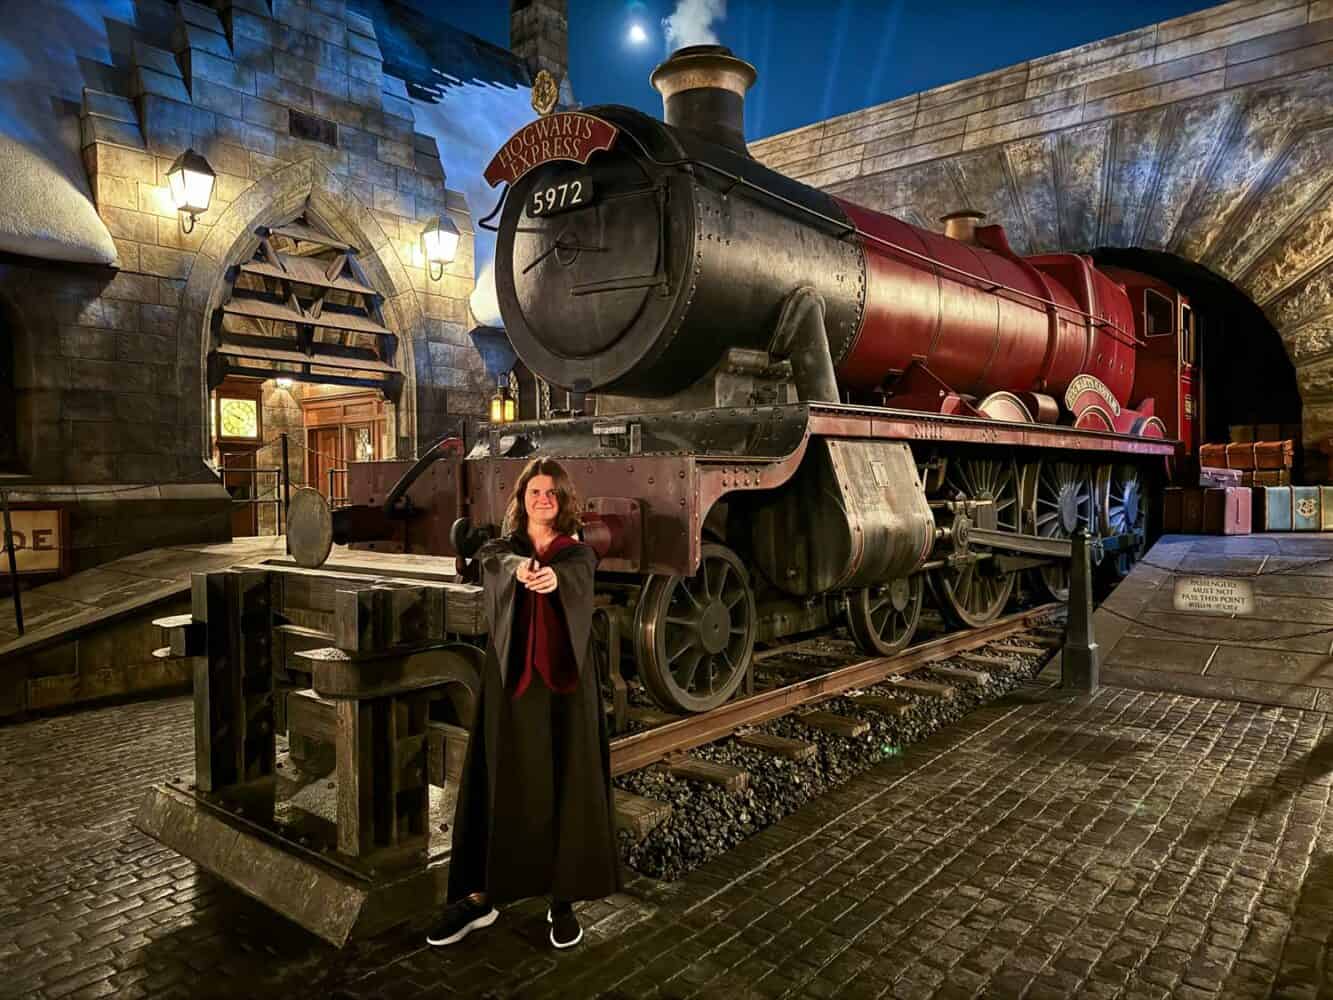 Erin in Gryffindor robe with wand in front of Hogwarts Express at Universal Studios Japan